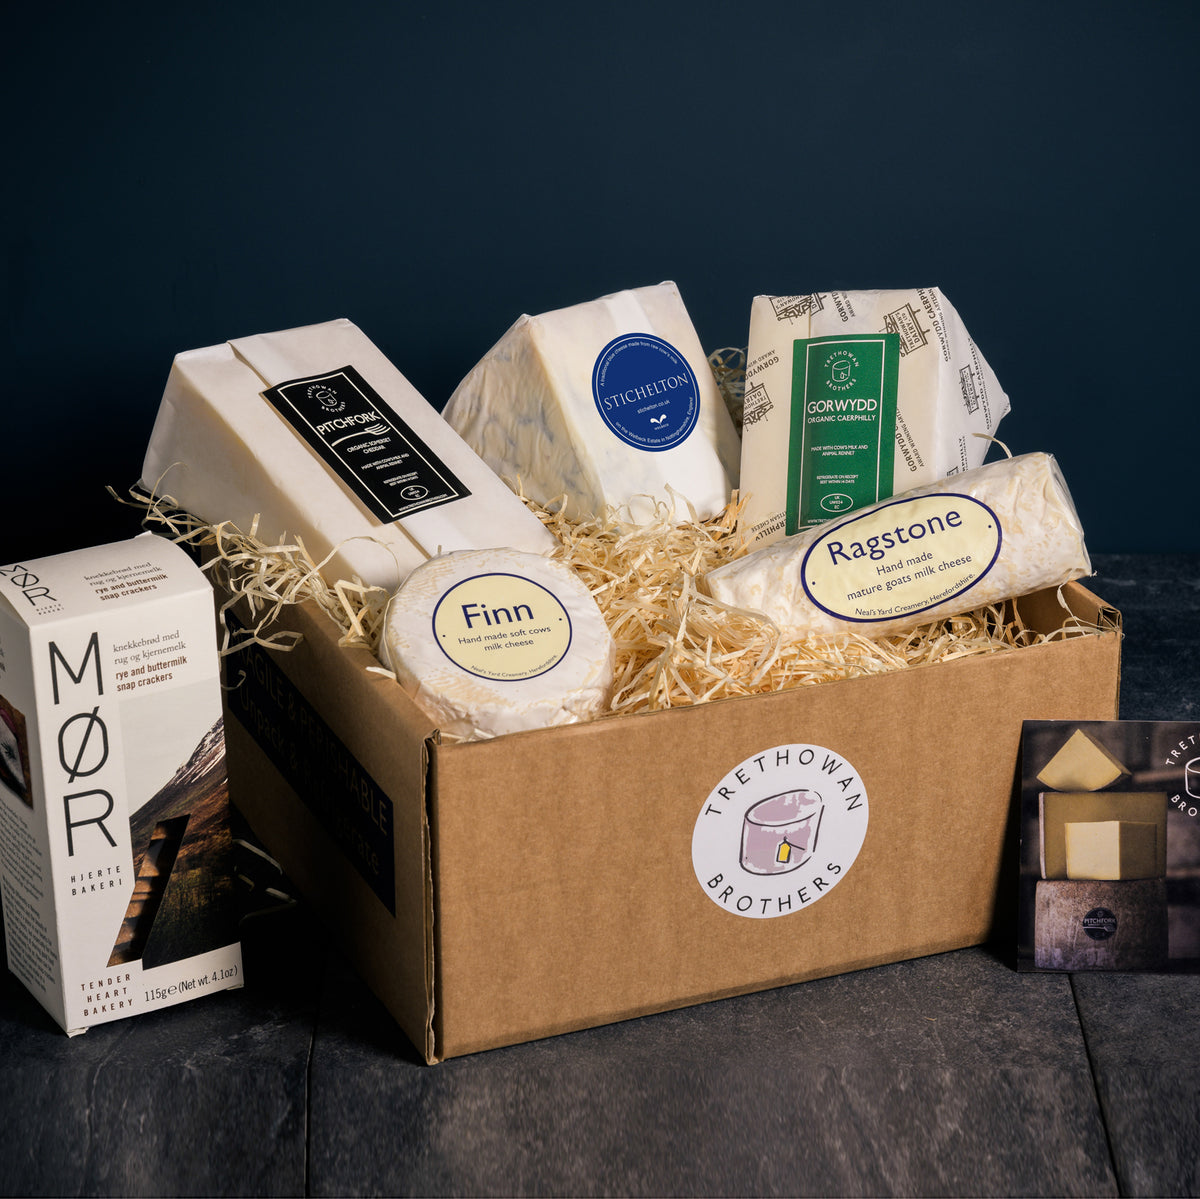 Handmade cheese hamper including the Trethowan Brothers Stichelton and Neals Yard Creamery